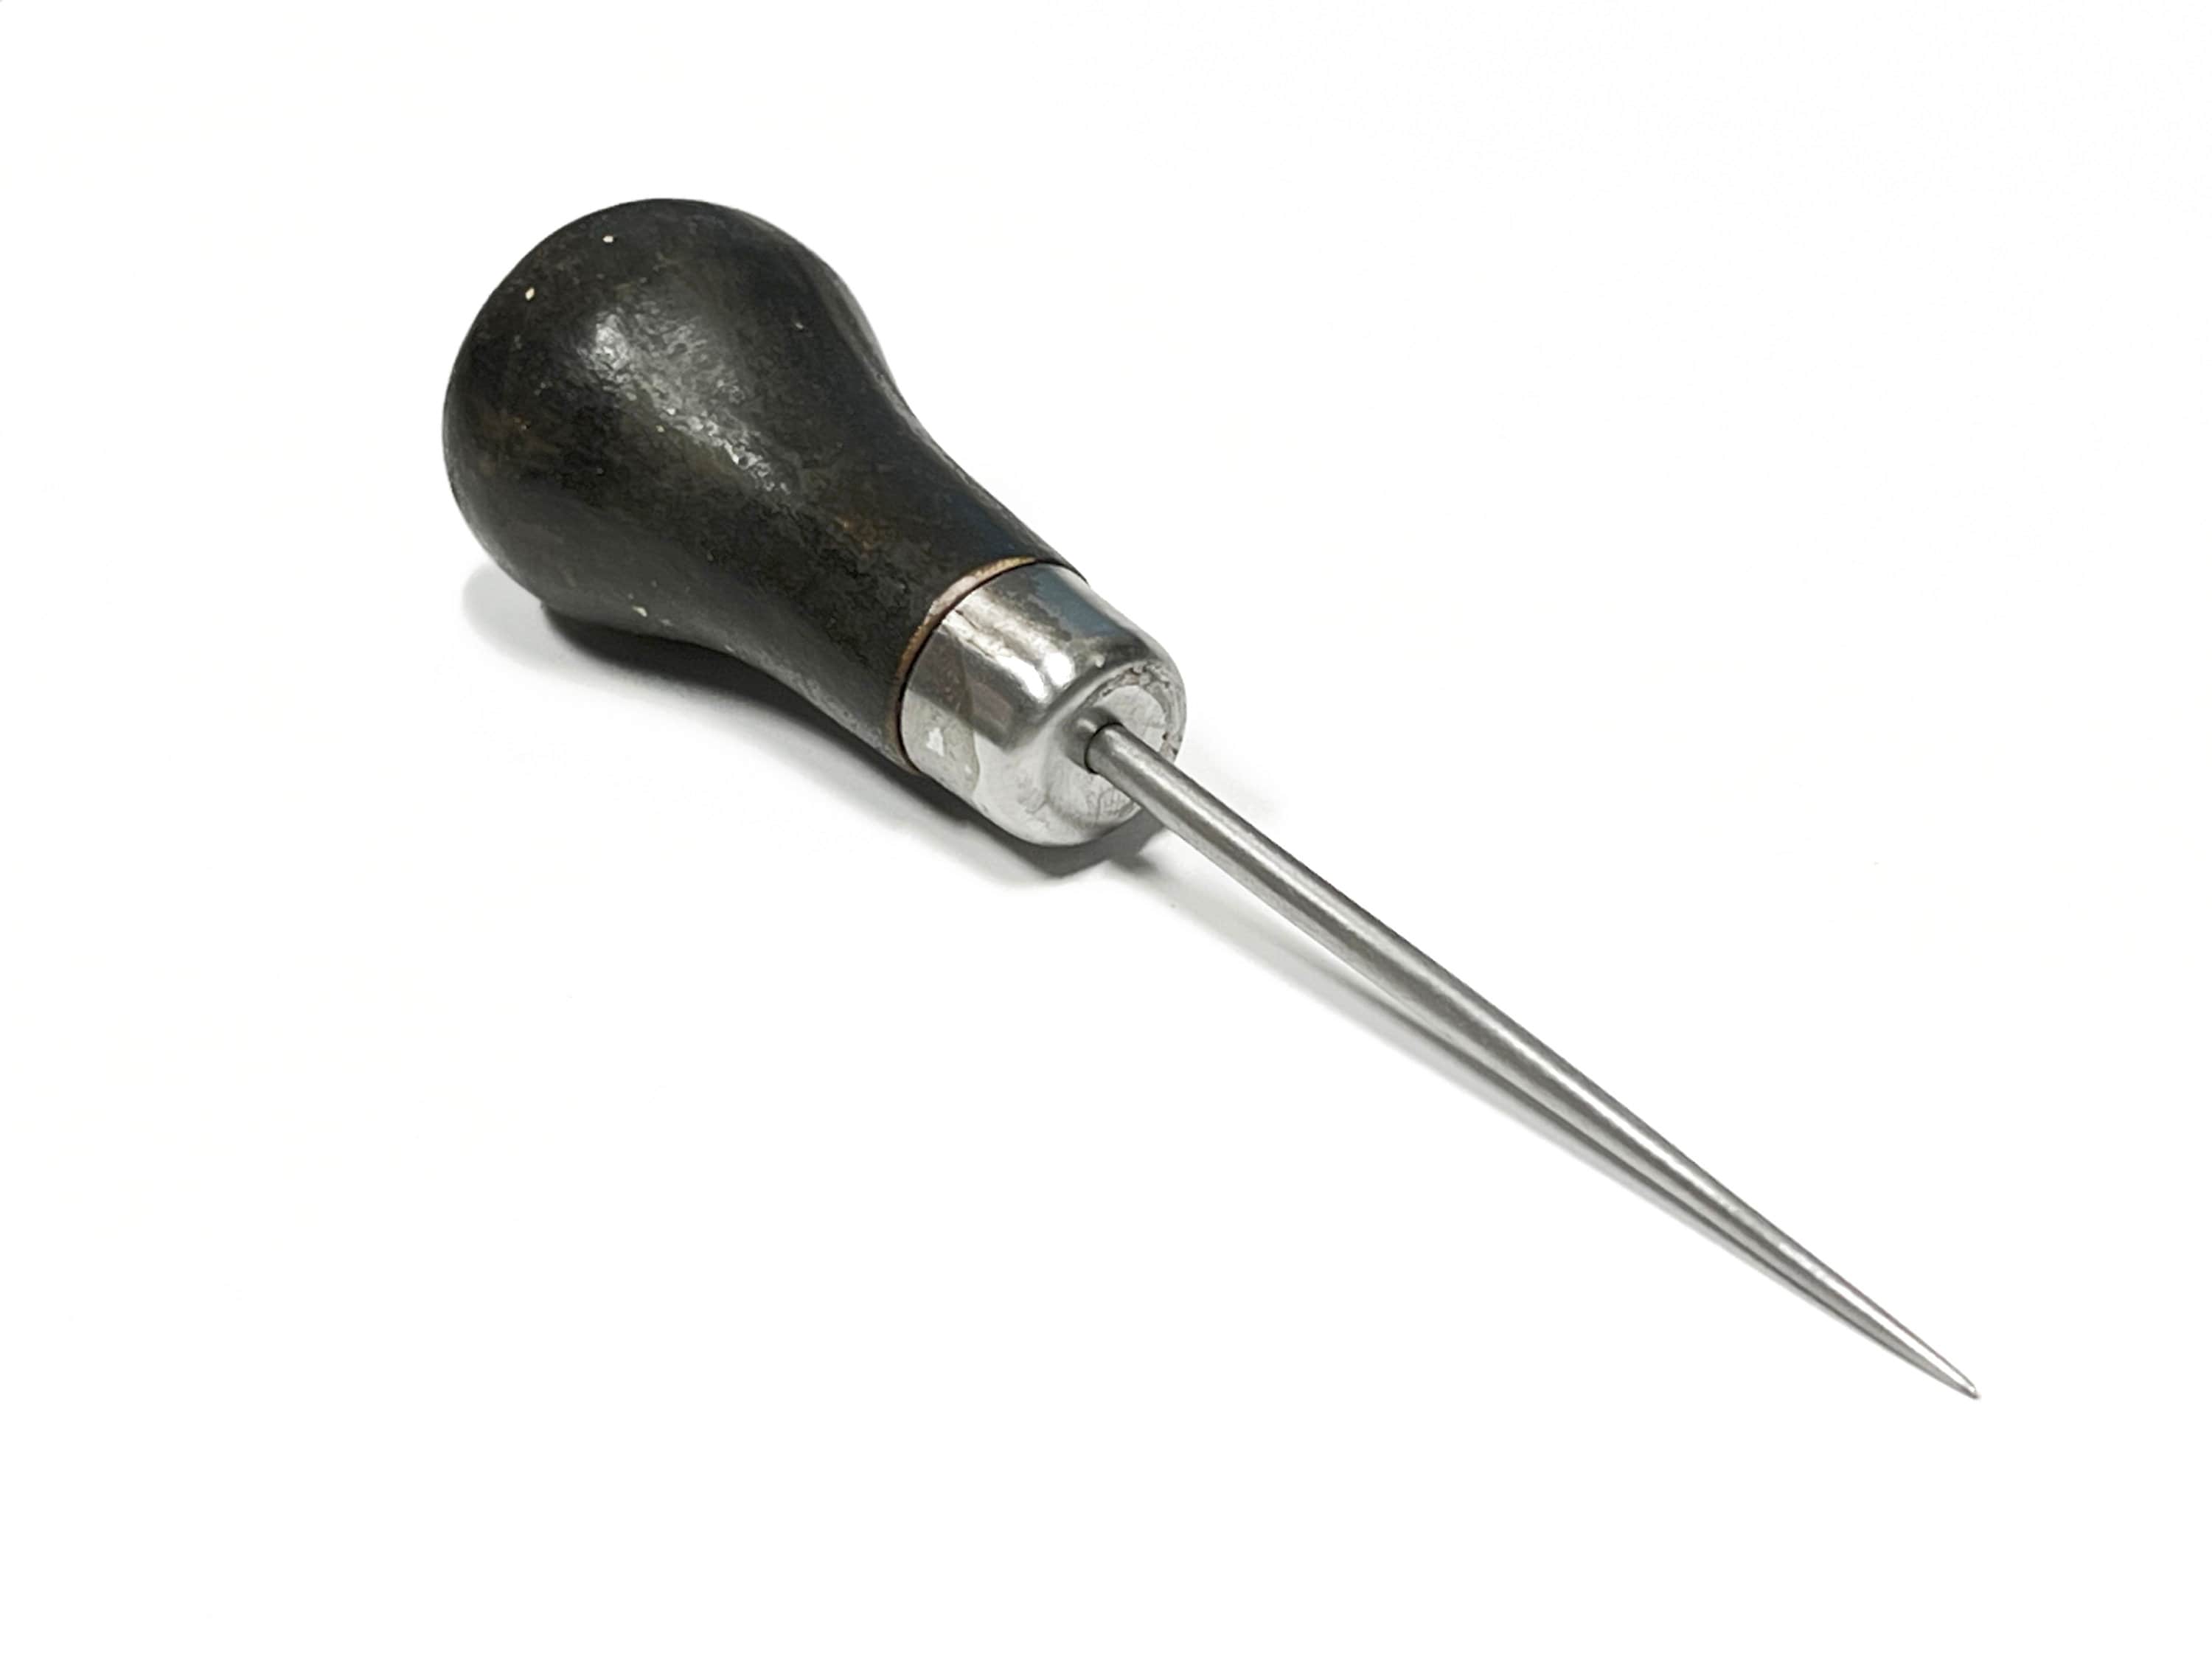 General Hardwood Handle Scratch Awl - Midwest Technology Products